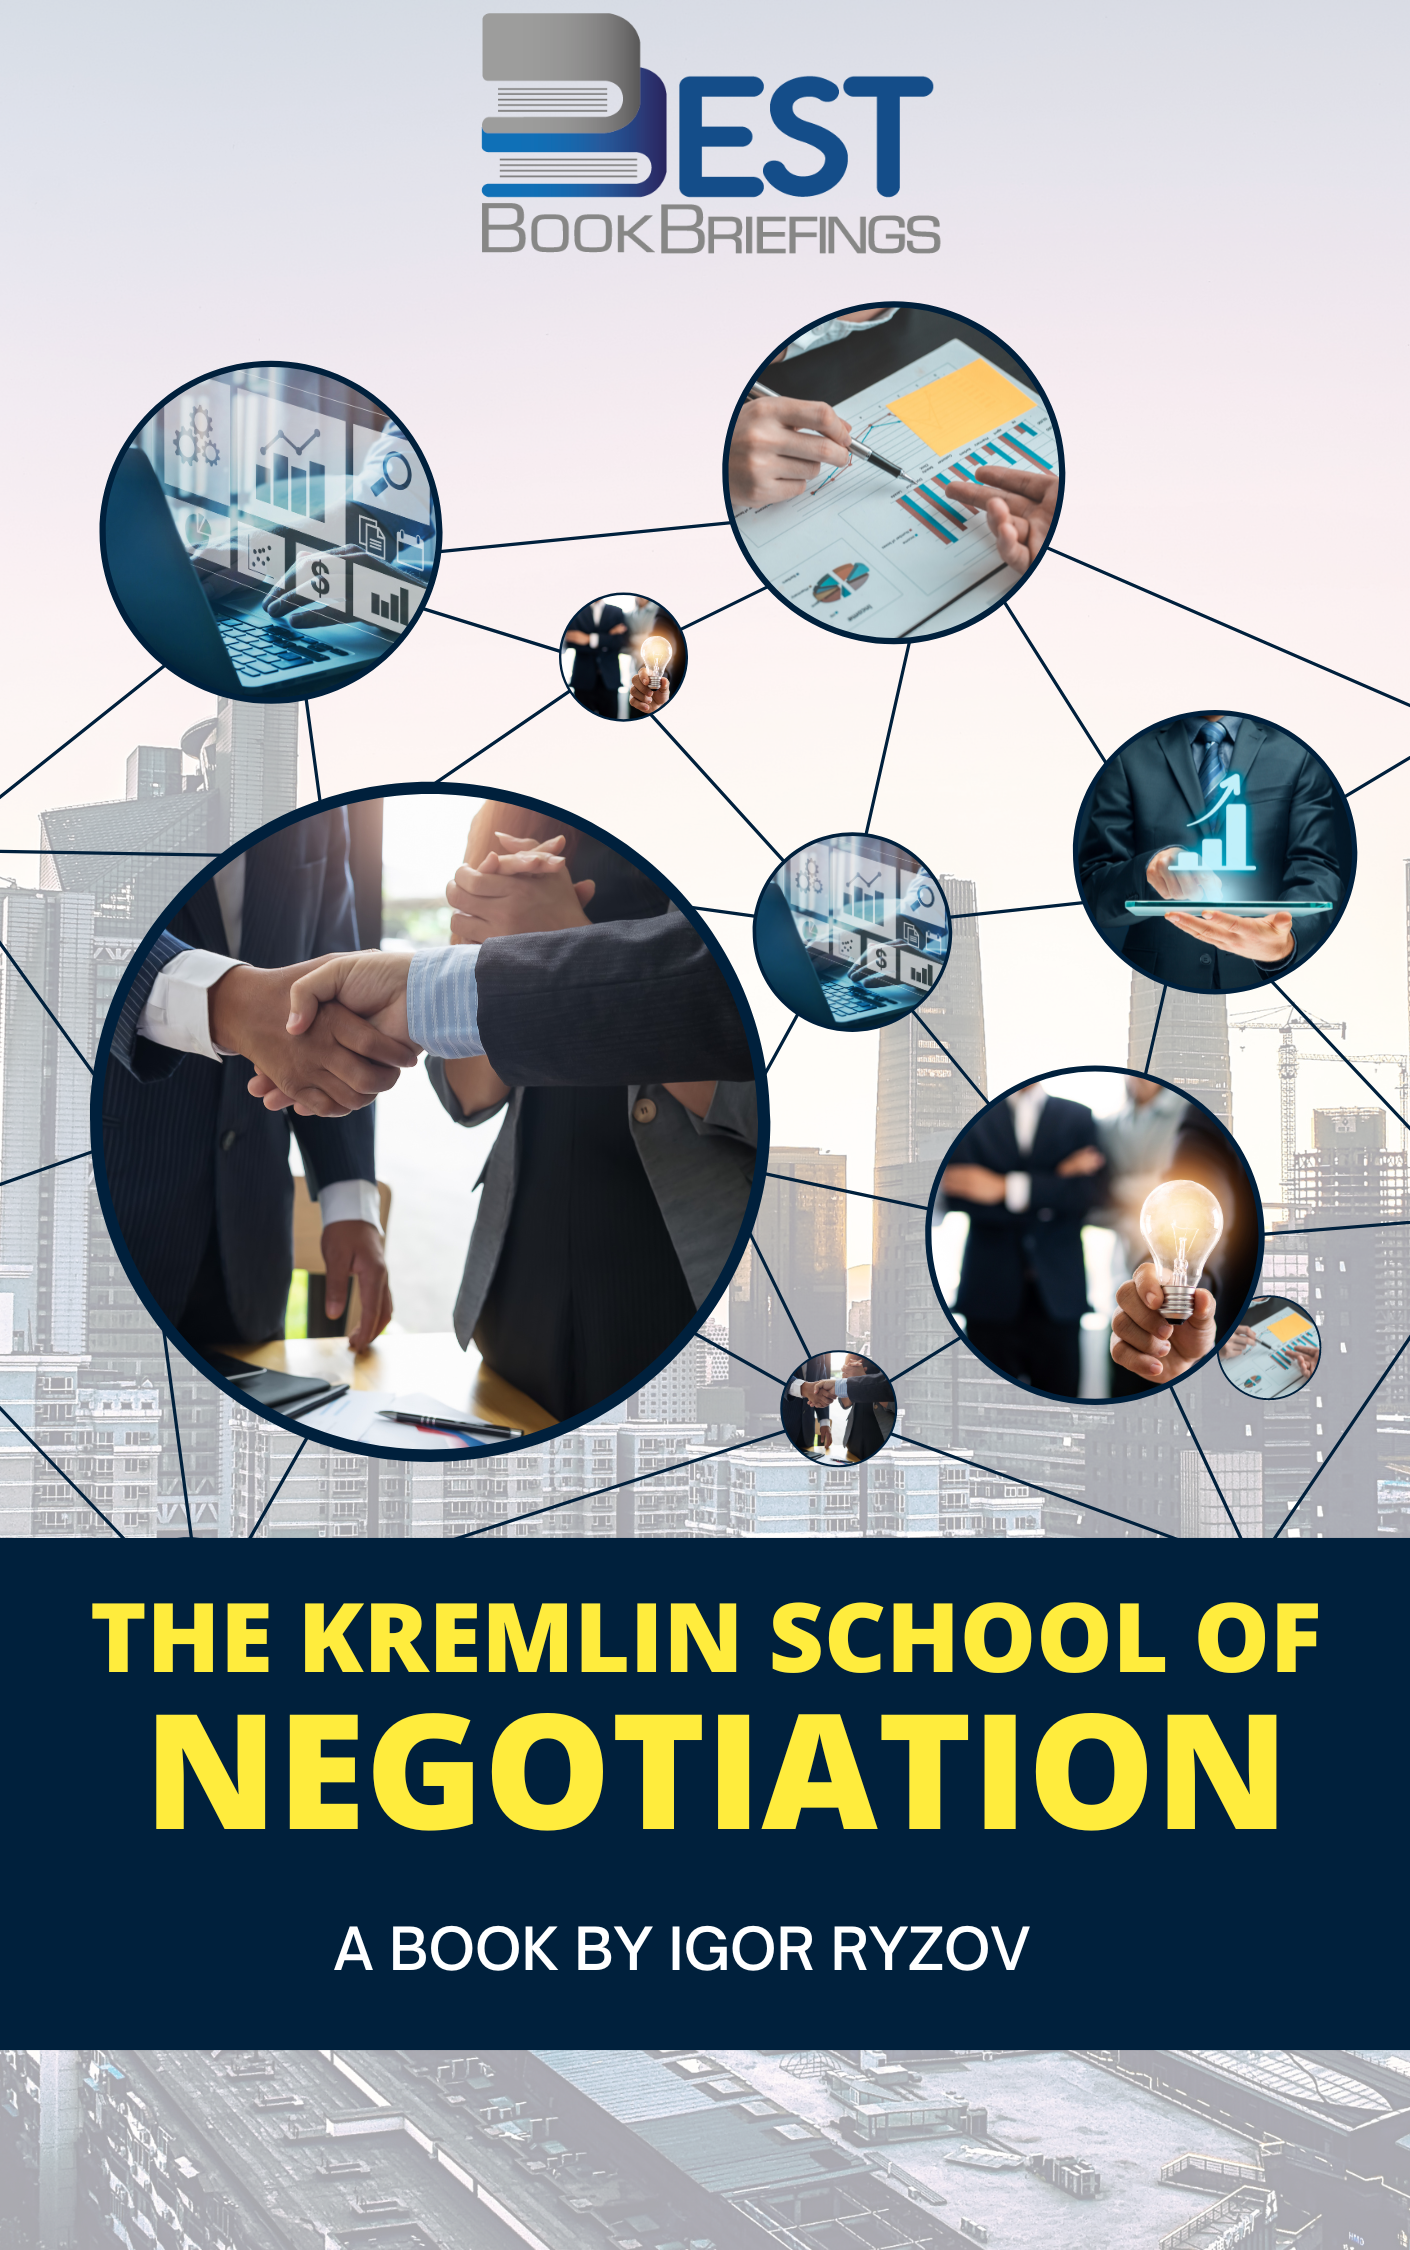 Negotiating is something that we all do, whether at work or at home. But what if we come across someone who just won’t give in? How can we defend ourselves against manipulation? And how do we say “no” without compromising a deal? Using the official Kremlin method, Igor Ryzov guides us through 